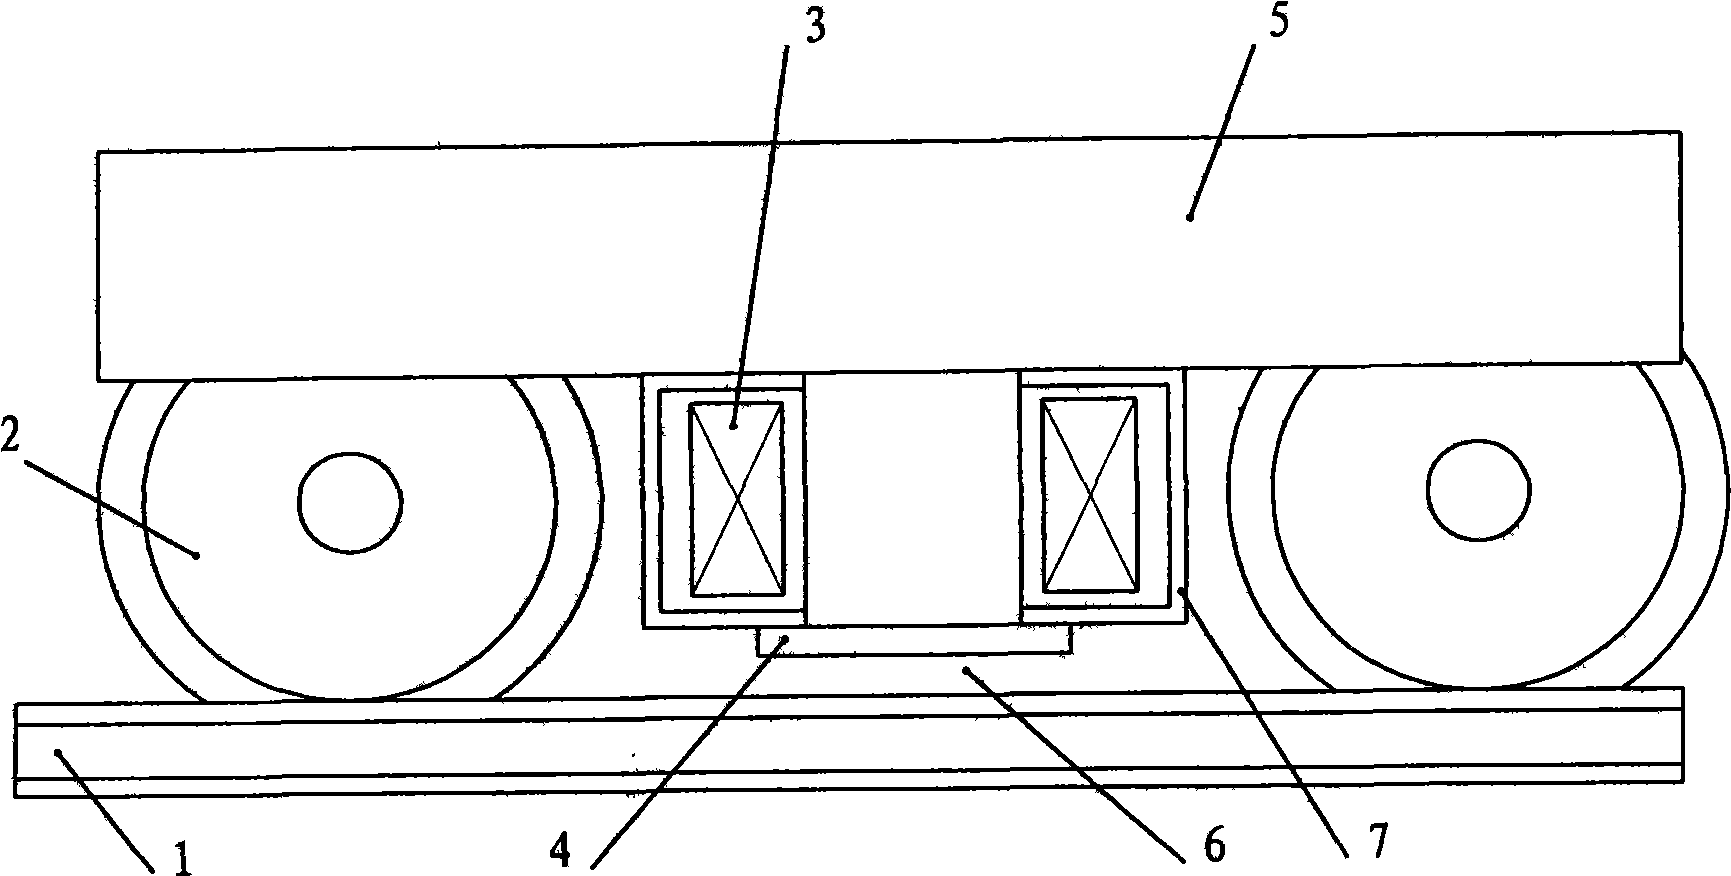 Superconduction eddy-current brake device of track multiple unit